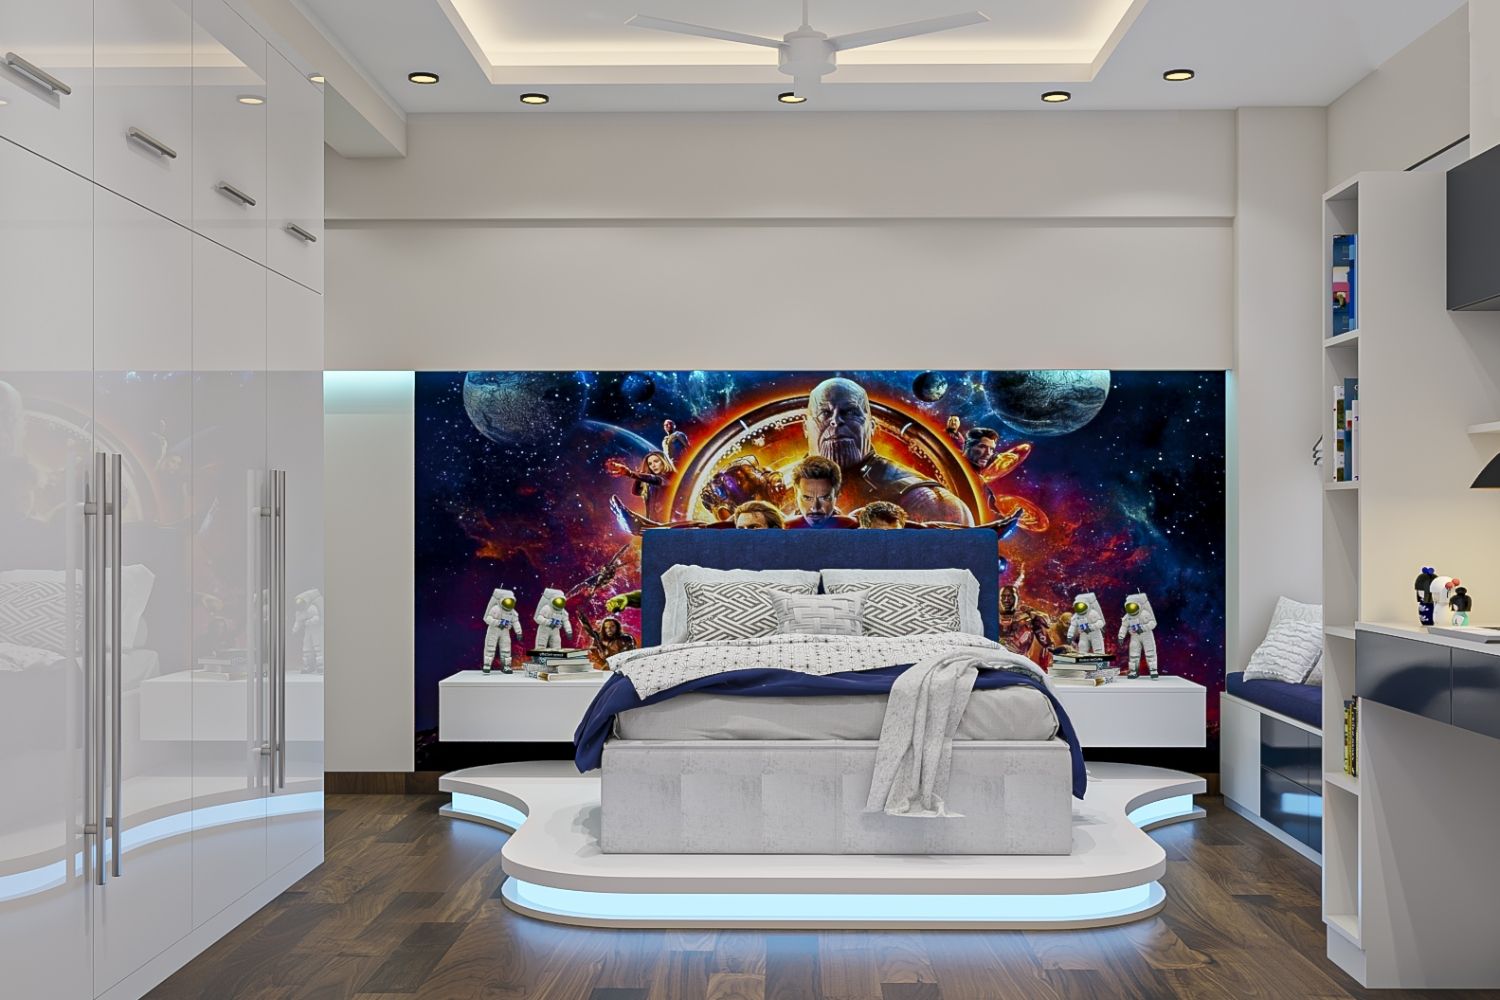 Modern Kids Room Design With Avengers-Themed Wallpaper And Platform Bed